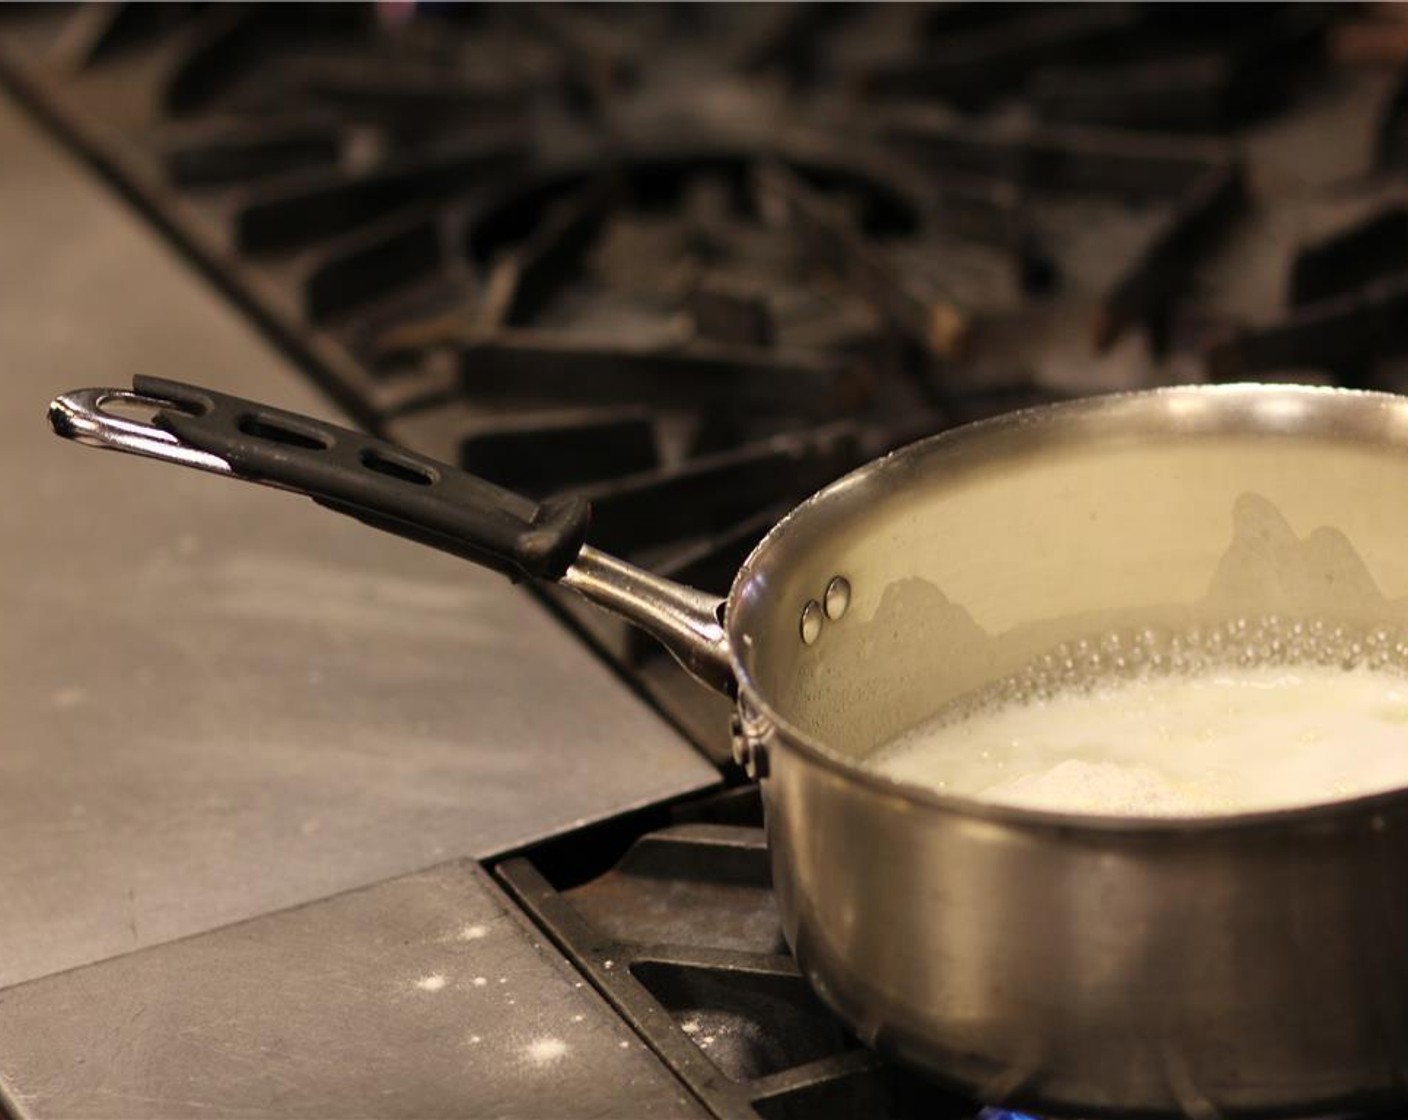 step 2 In a large saucepan, combine the Water (1 1/2 cups), Butter (1/2 cup), Granulated Sugar (1 tsp) and Salt (1/2 tsp) and bring to a boil. Reduce the heat to moderate.